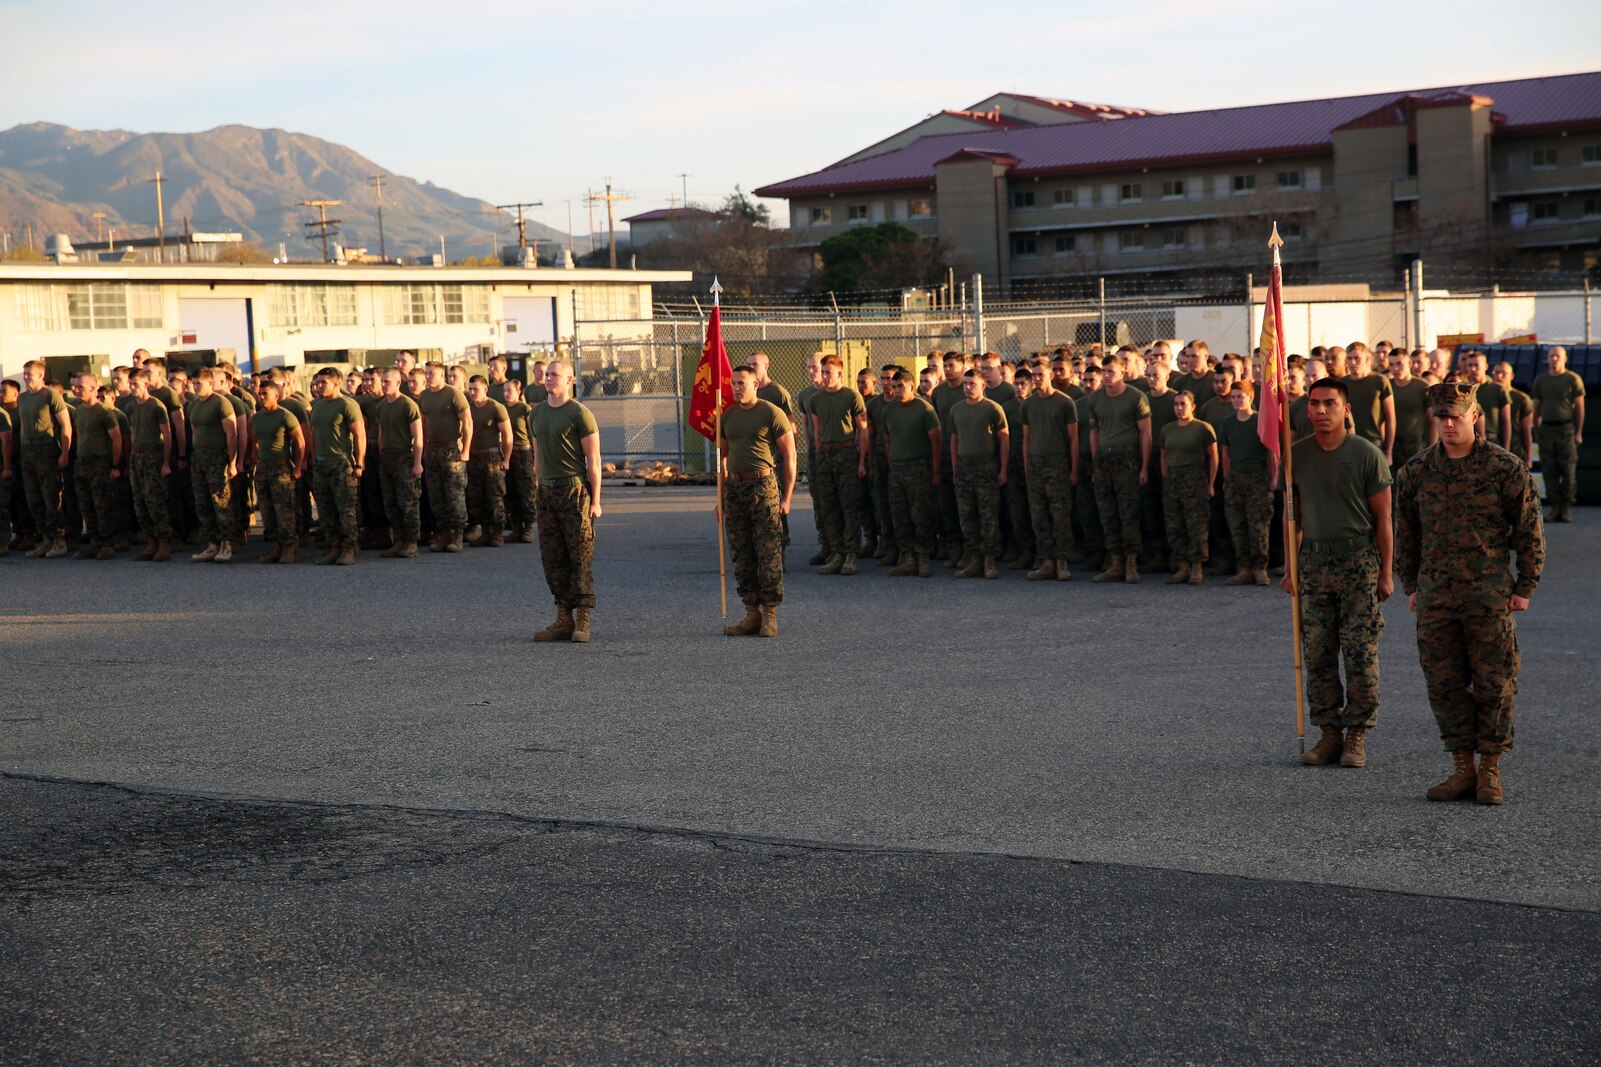 Marines with 1st Maintenance Battalion, Combat Logistics Regiment 15, 1st Marine Logistics Group, stand at the position of attention during an award ceremony aboard Camp Pendleton, California, Dec. 19, 2014. (Marine Corps photo by Cpl. Cody Haas/ Released)